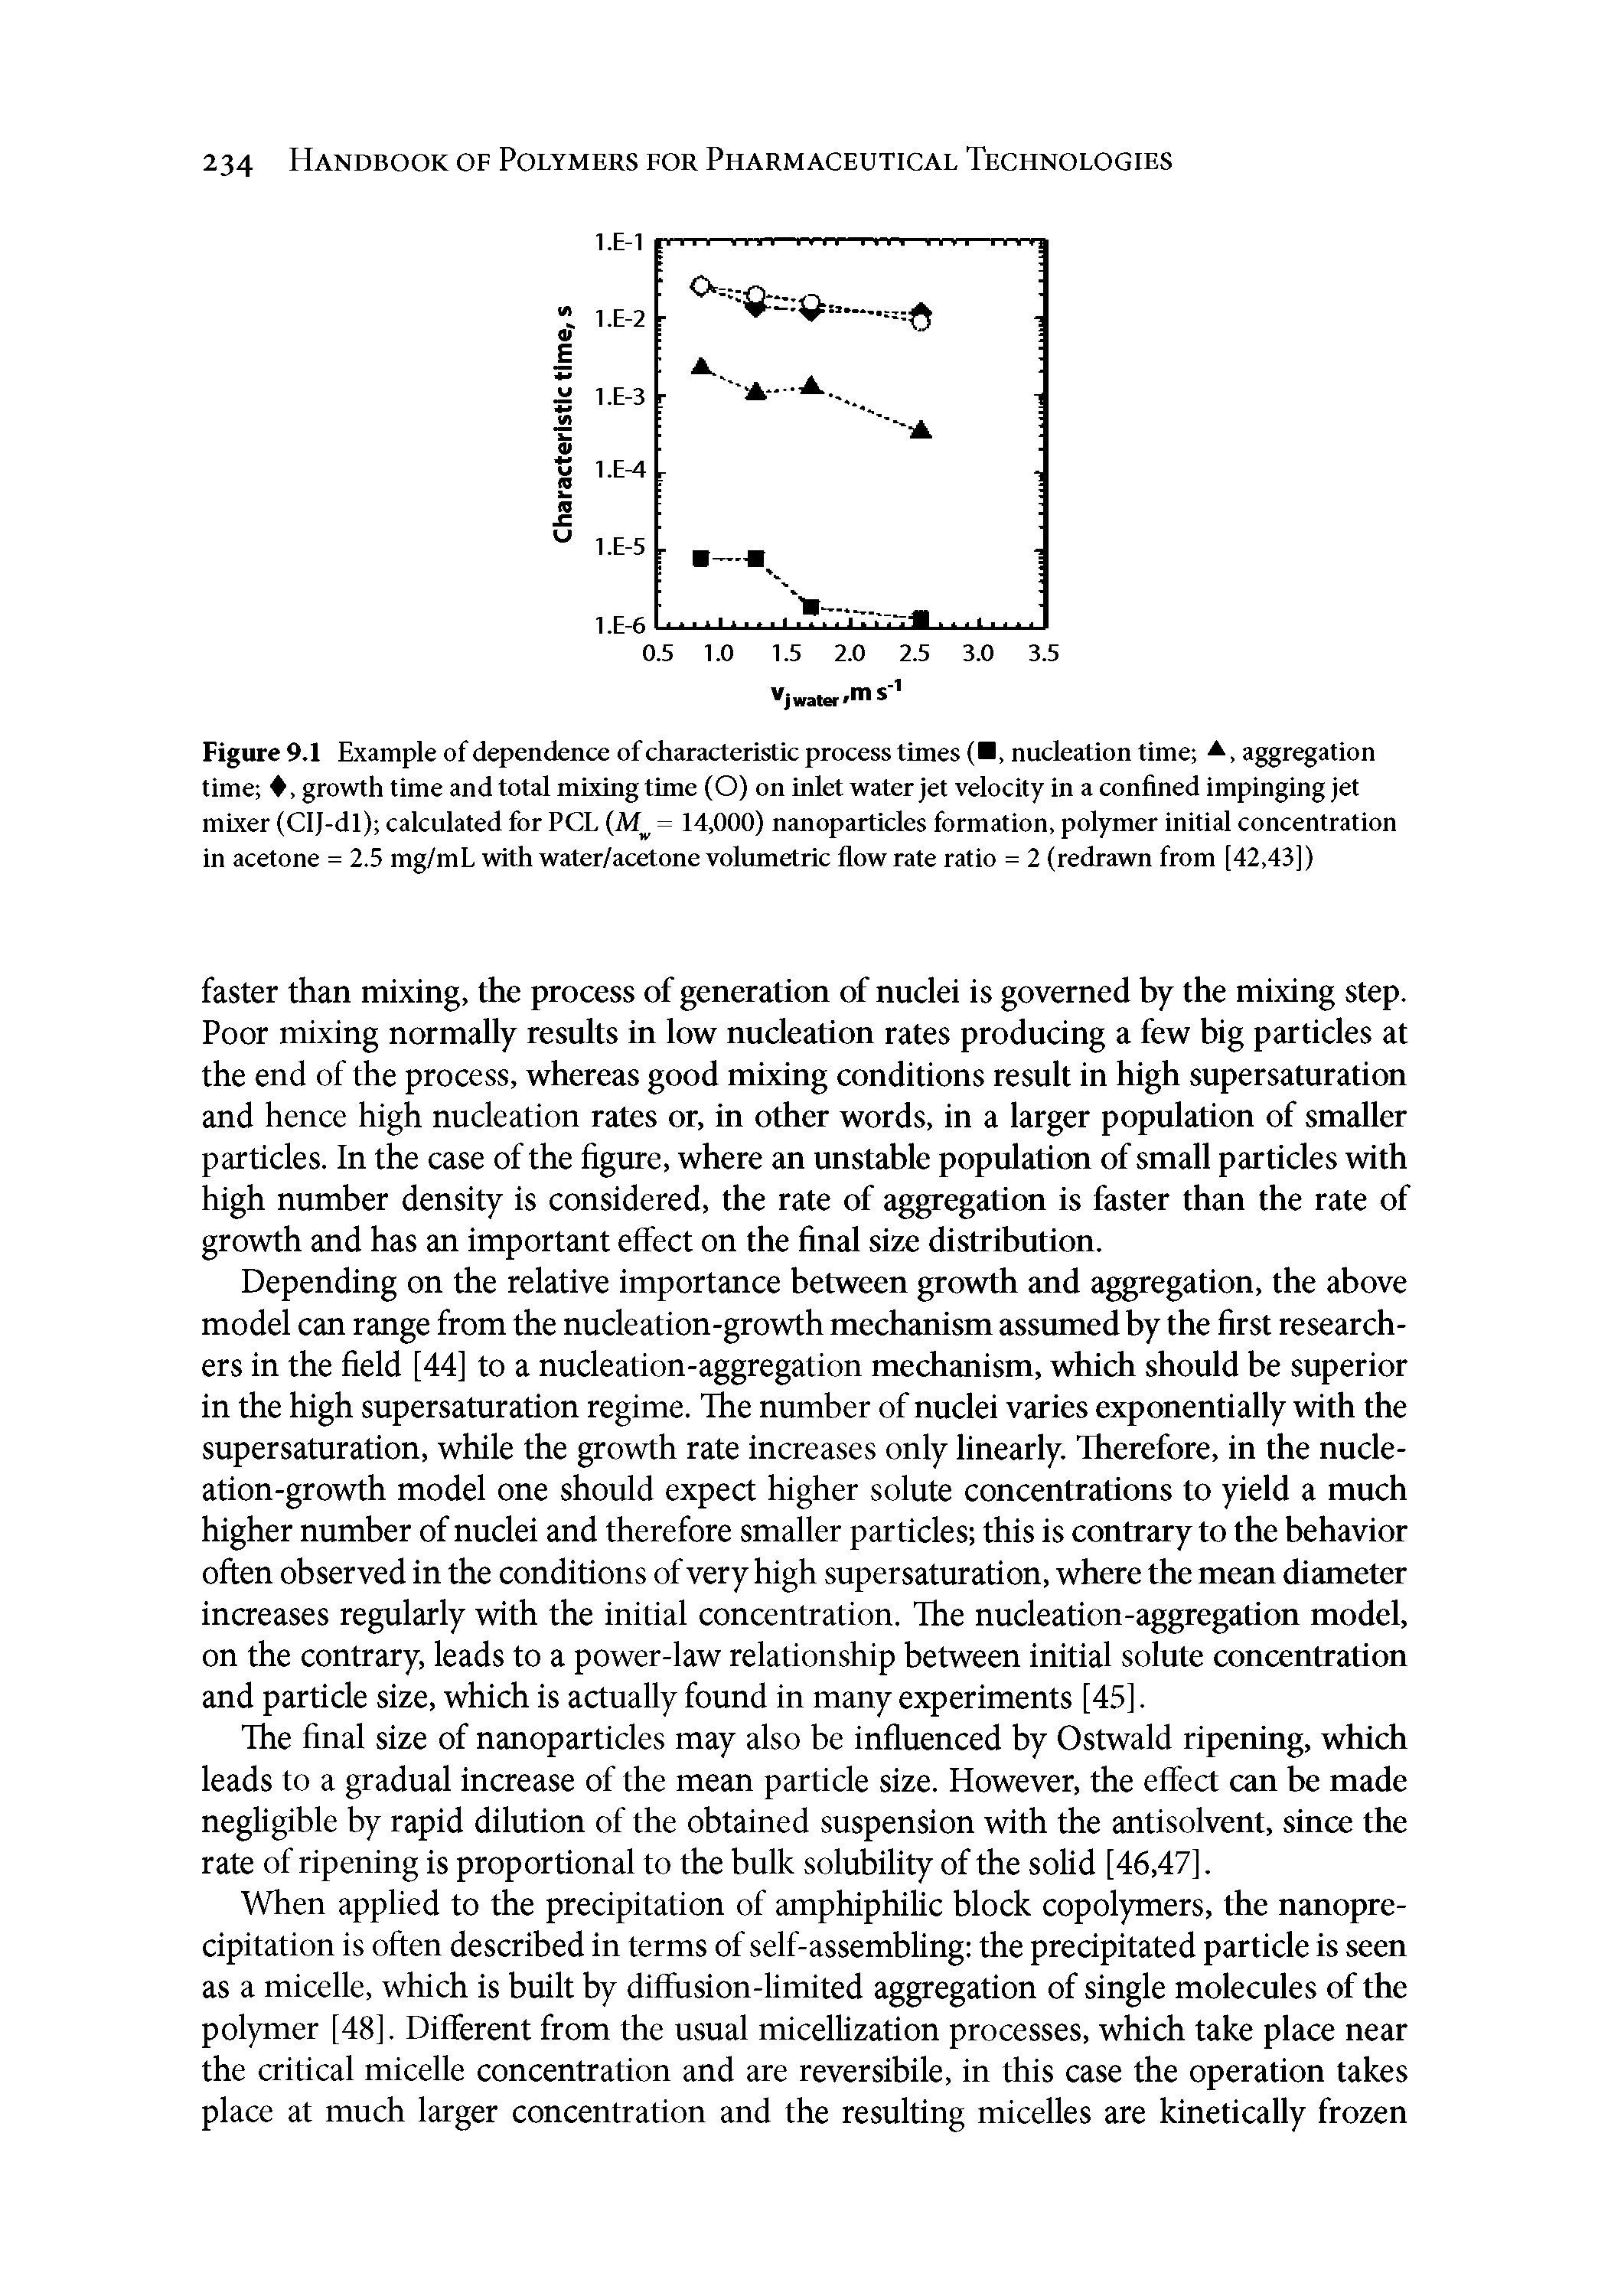 Figure 9.1 Example of dependence of characteristic process times ( , nucleation time A, aggregation time , growth time and total mixing time (O) on inlet water jet velocity in a confined impinging jet mixer (ClJ-dl) calculated for PCL (iW = 14,000) nanoparticles formation, polymer initial concentration in acetone = 2.5 mg/mL with water/acetone volumetric flow rate ratio = 2 (redrawn from [42,43])...